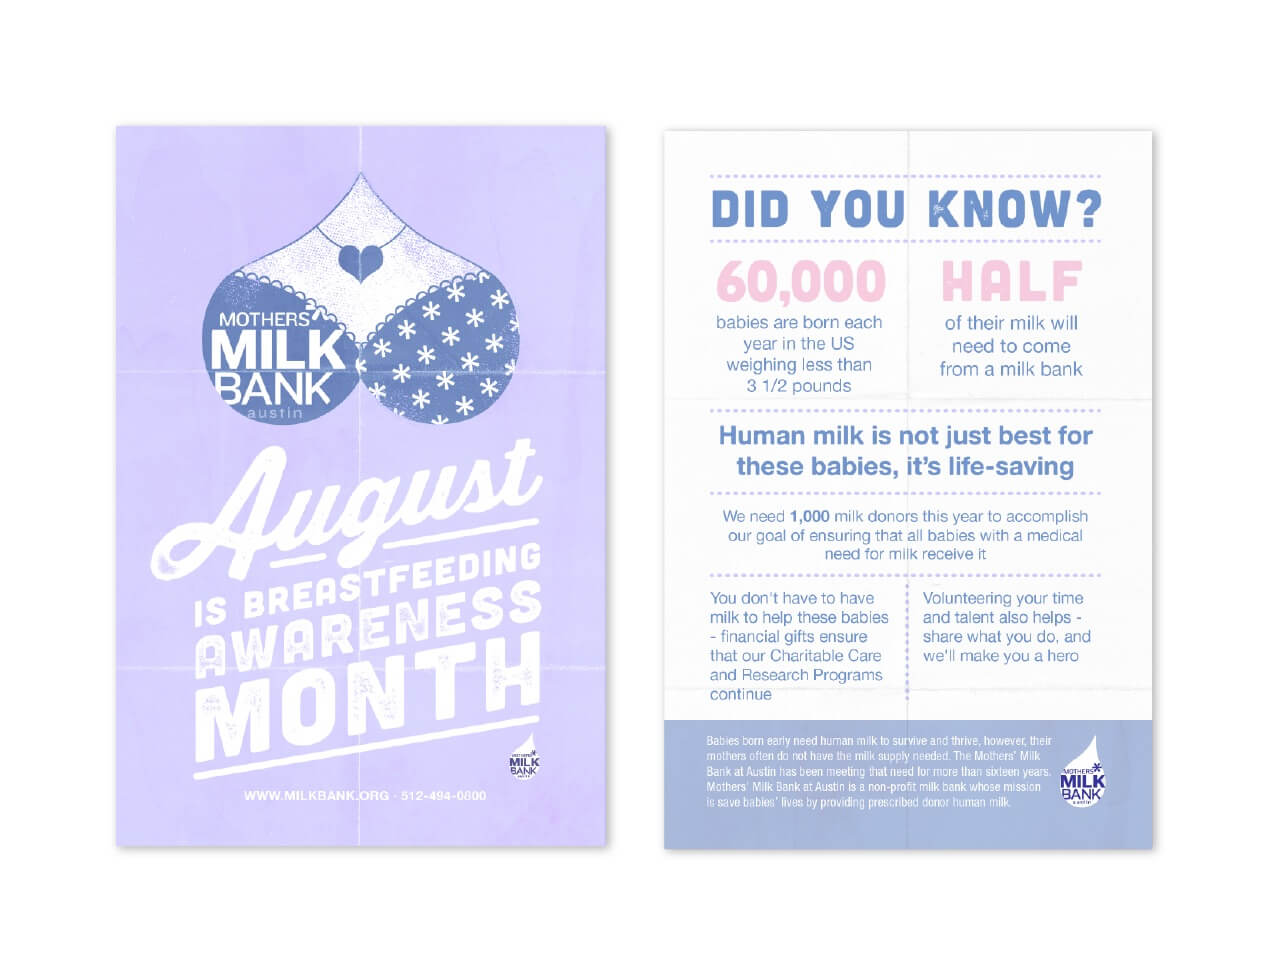 Mothers Milk Bank messaging and flyer design